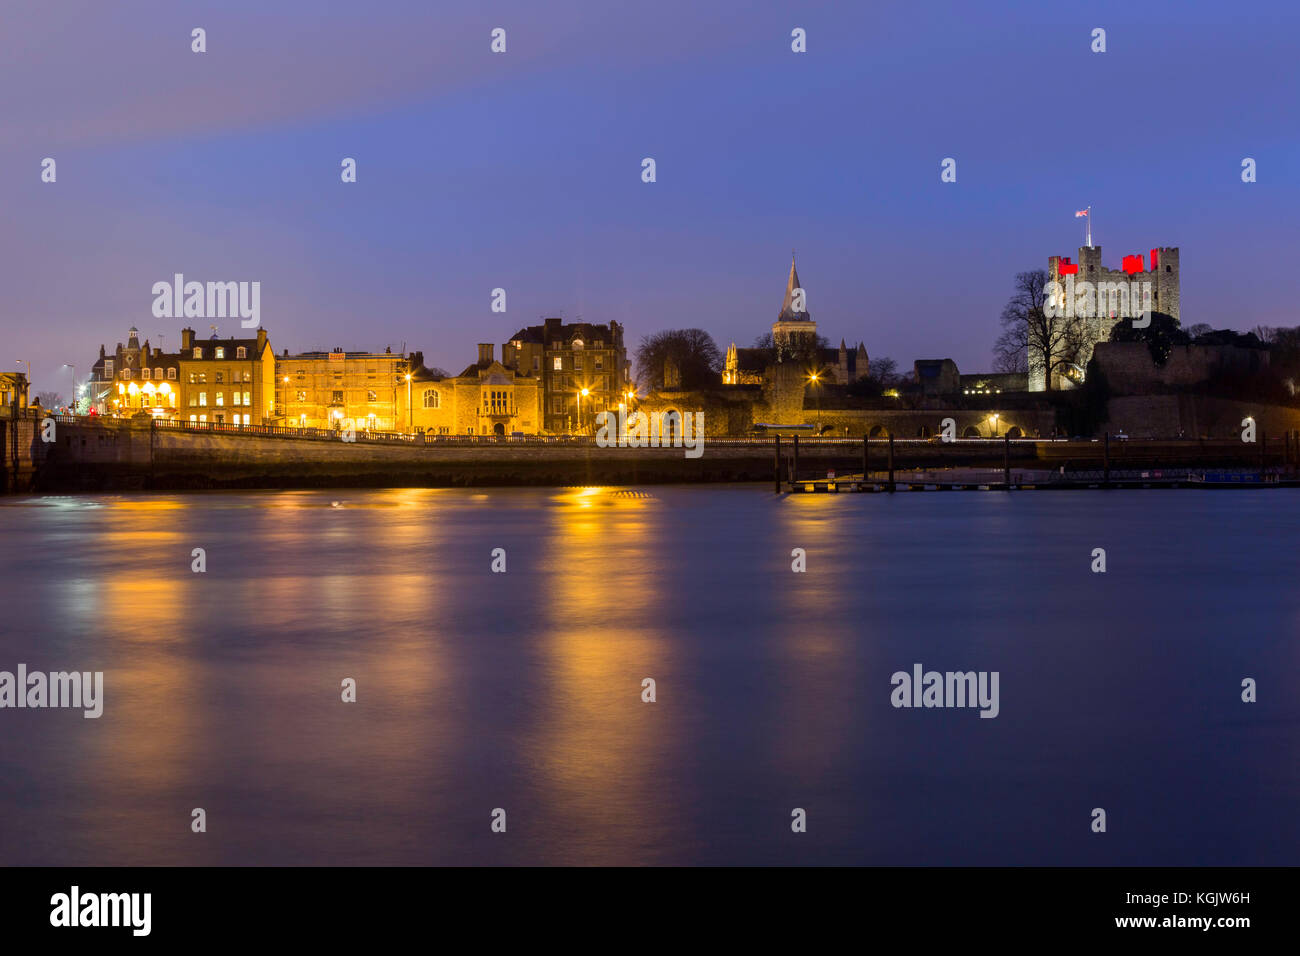 Rochester Castle, Cathedral and the buildings on Esplanade taken during the Blue Hour after sunset from across the River Medway at Strood, Kent, UK. Stock Photo